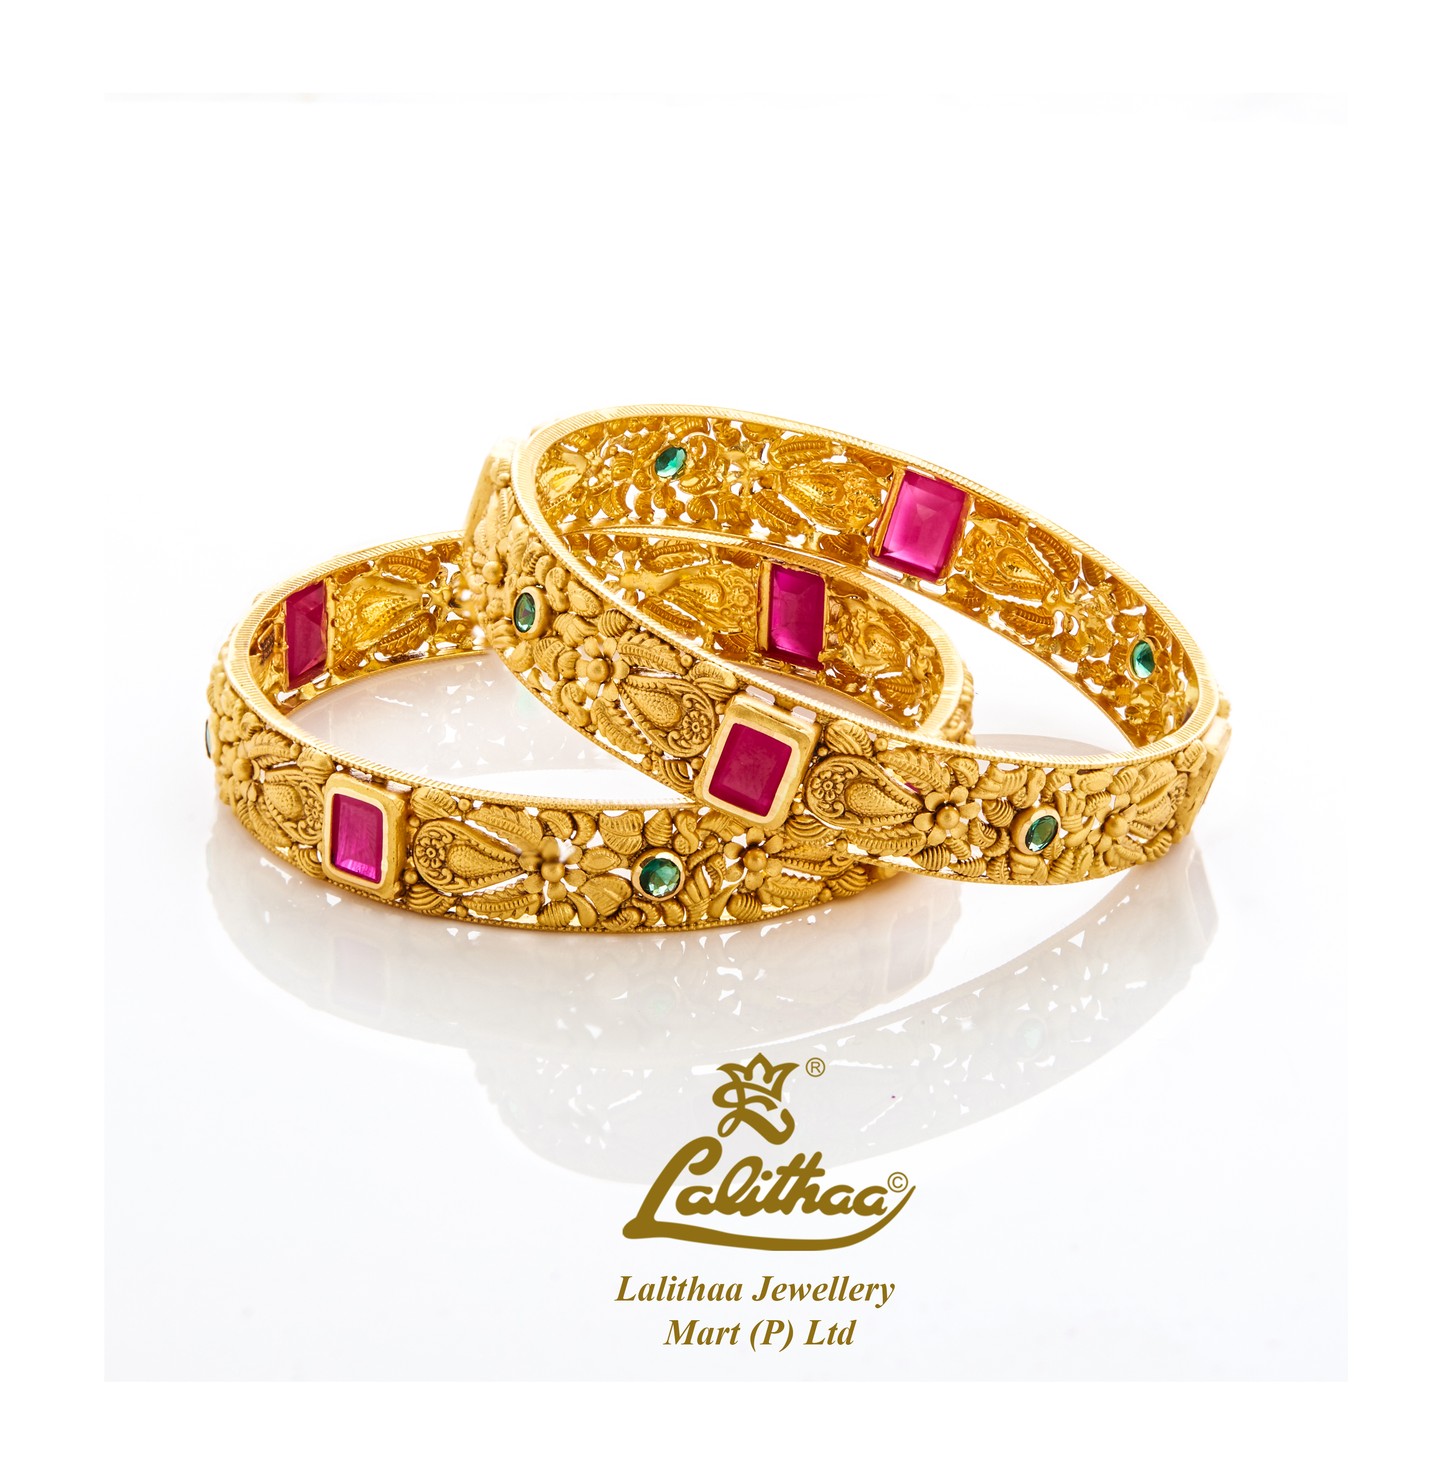 Lalitha jewellery review